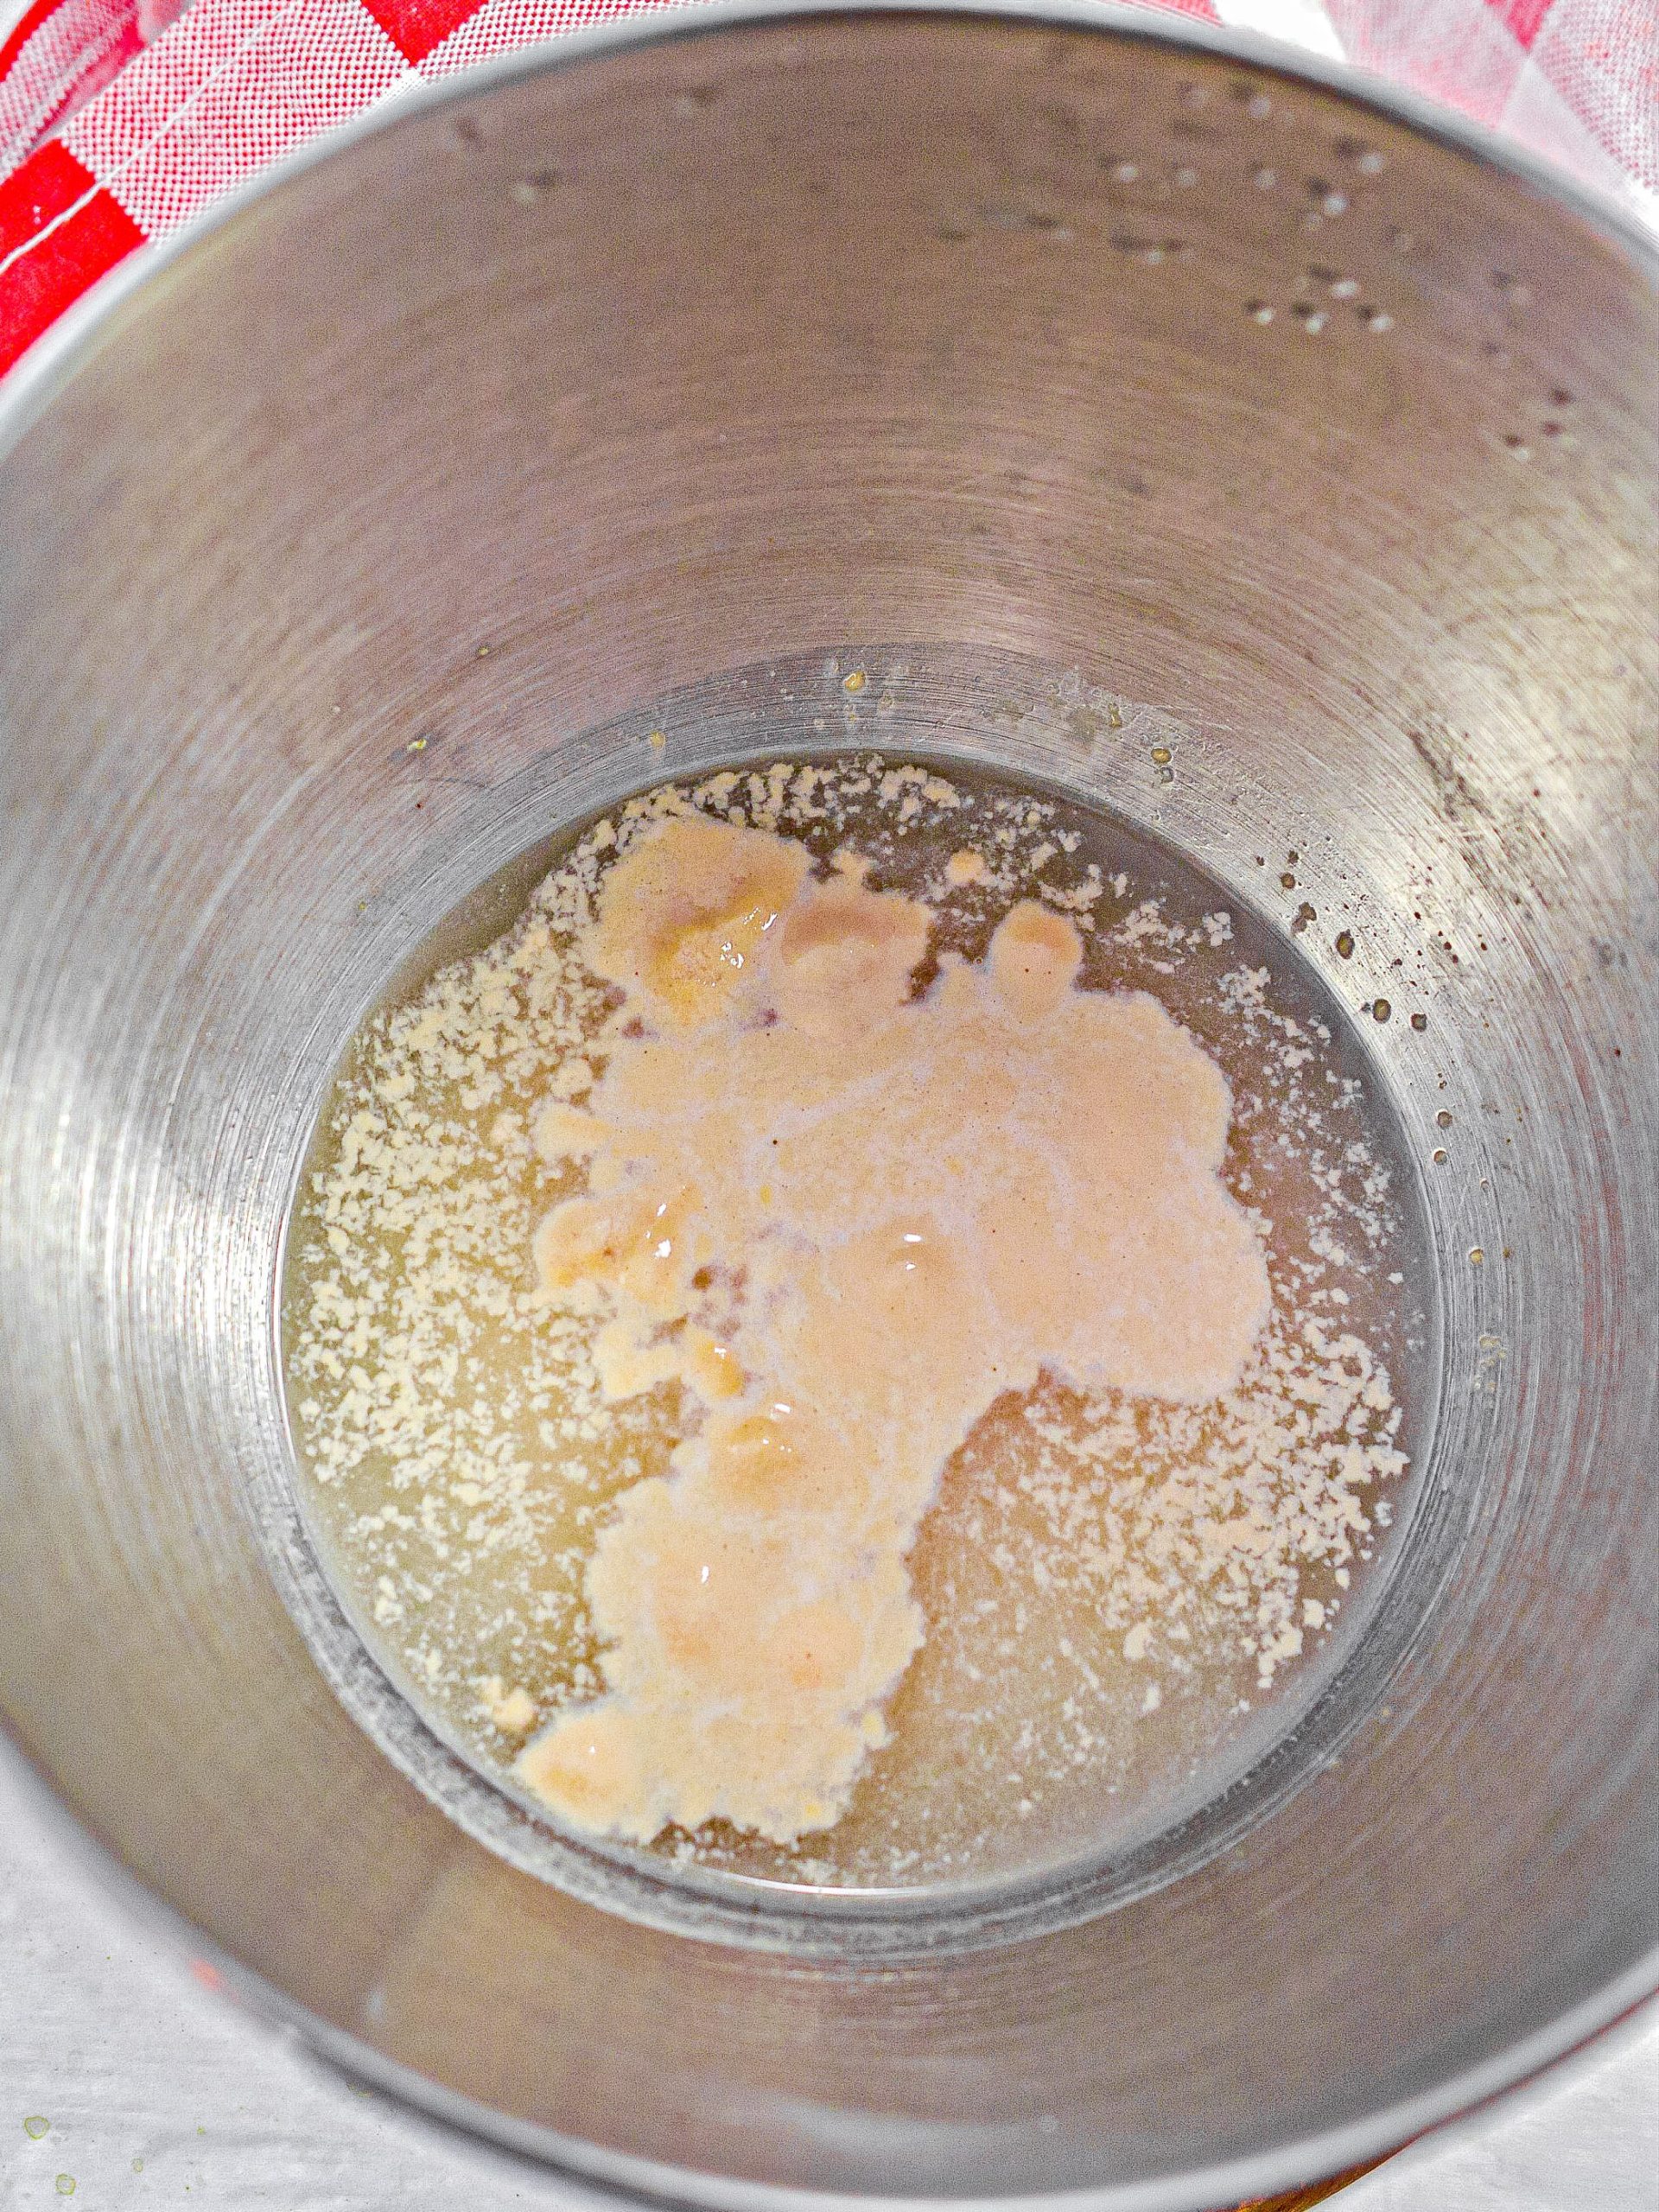 Add the yeast and water to a large mixing bowl and allow to sit to bloom for 10 minutes.